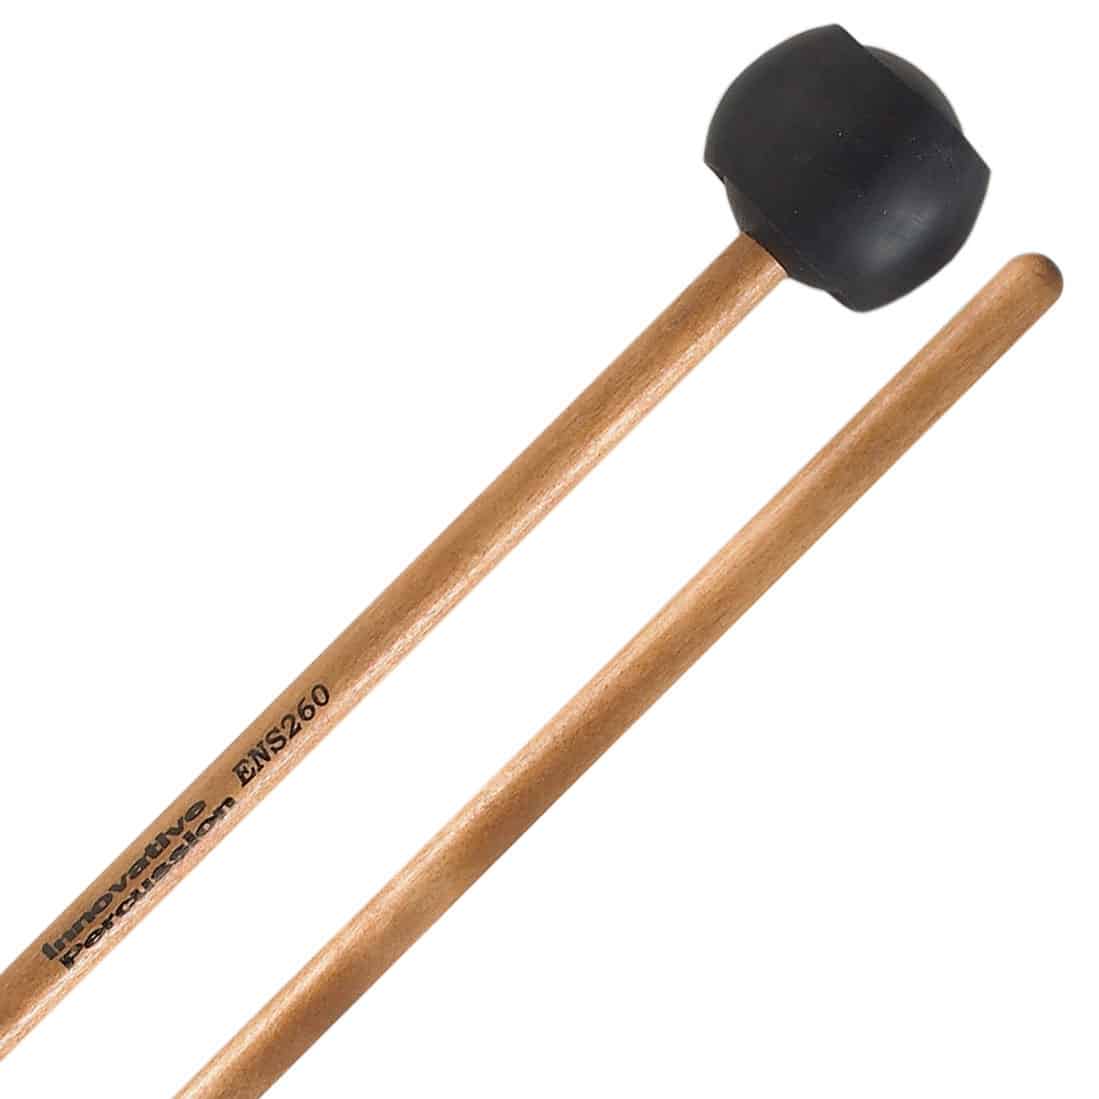 Innovative Percussion ENS260 Ensemble Series Hard Core Latex Covered Mallets